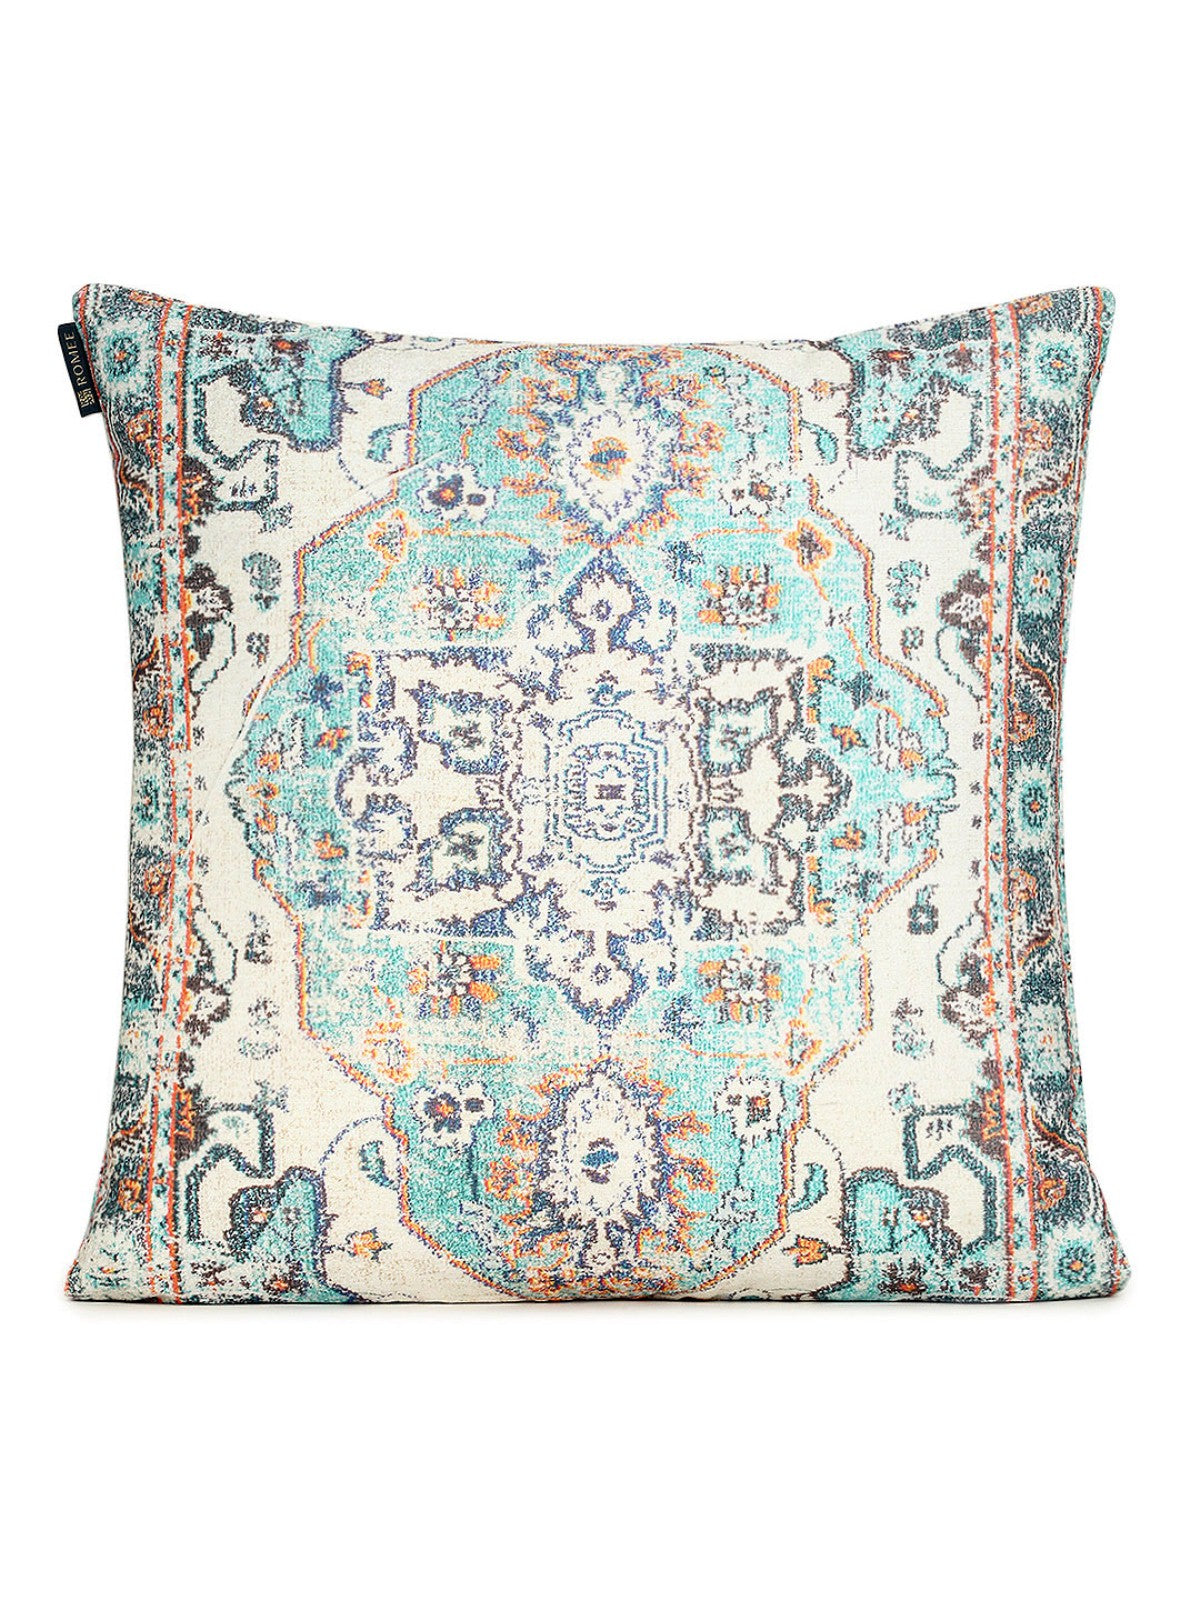 Beige and Turquoise Set of 2 Cushion Covers 24x24 Inch